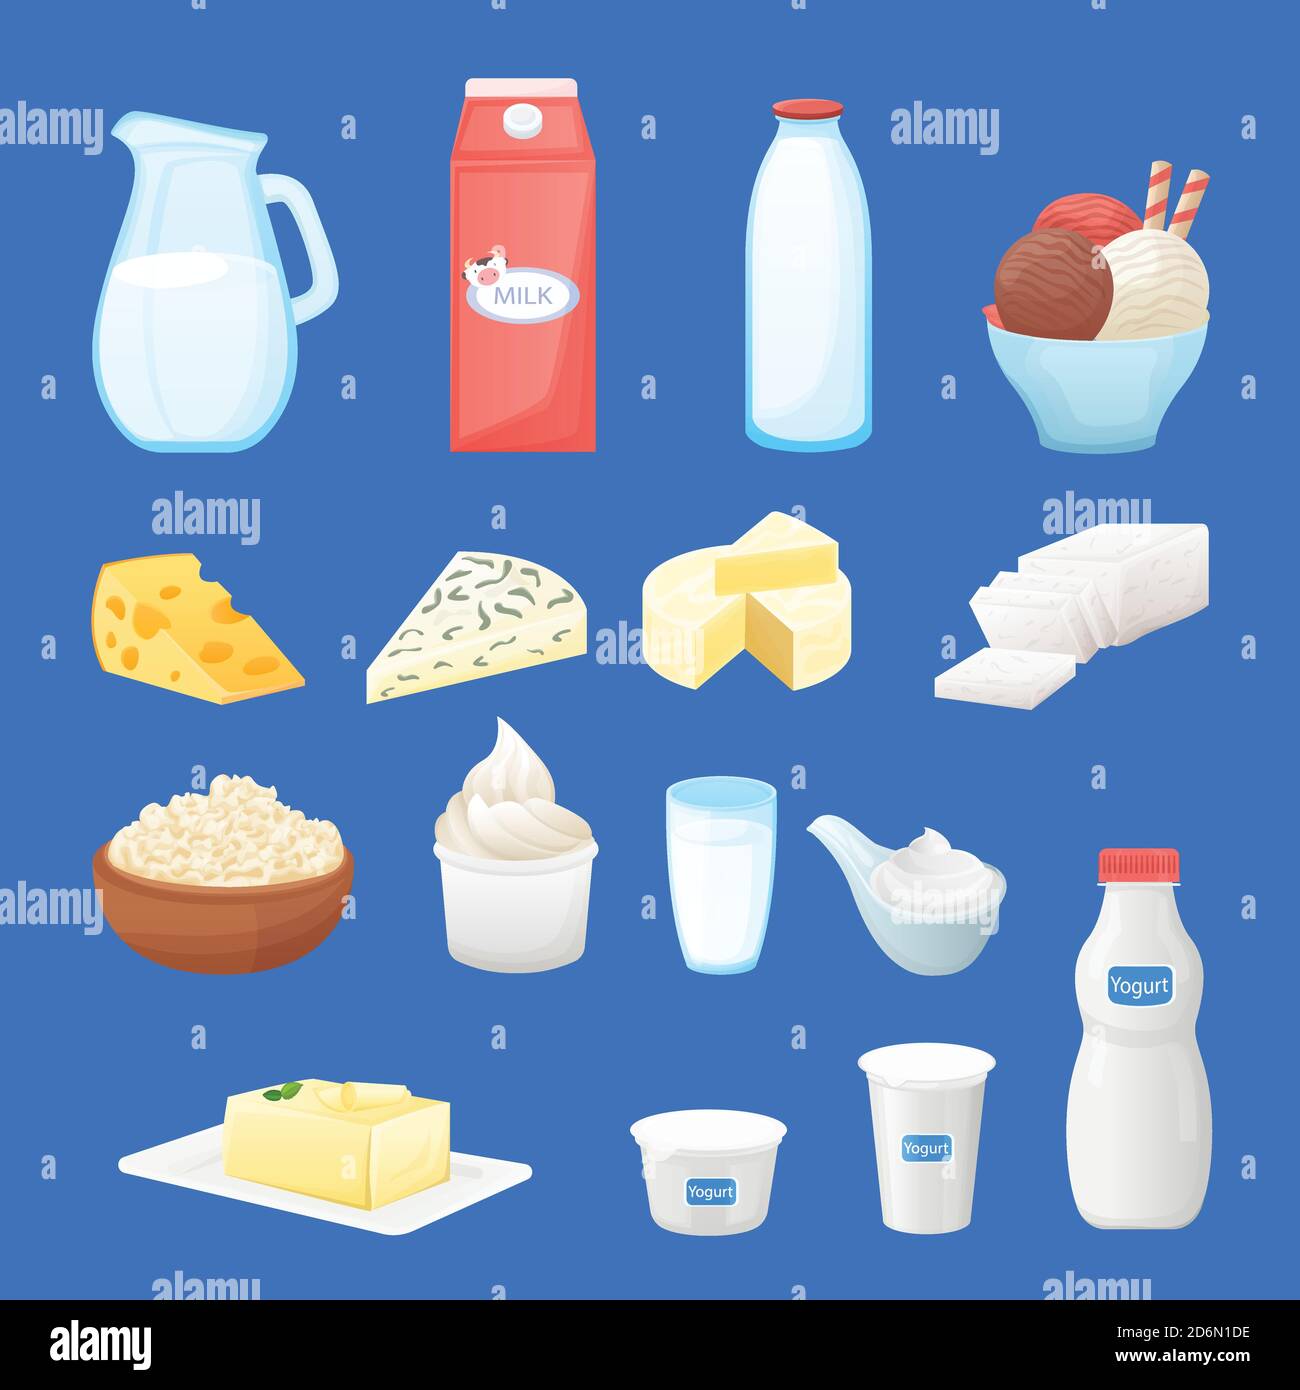 Dairy farm fresh products set. Vector cartoon healthy food illustration. Milk bottle, cottage cheese, yogurt package, butter icons. Stock Vector